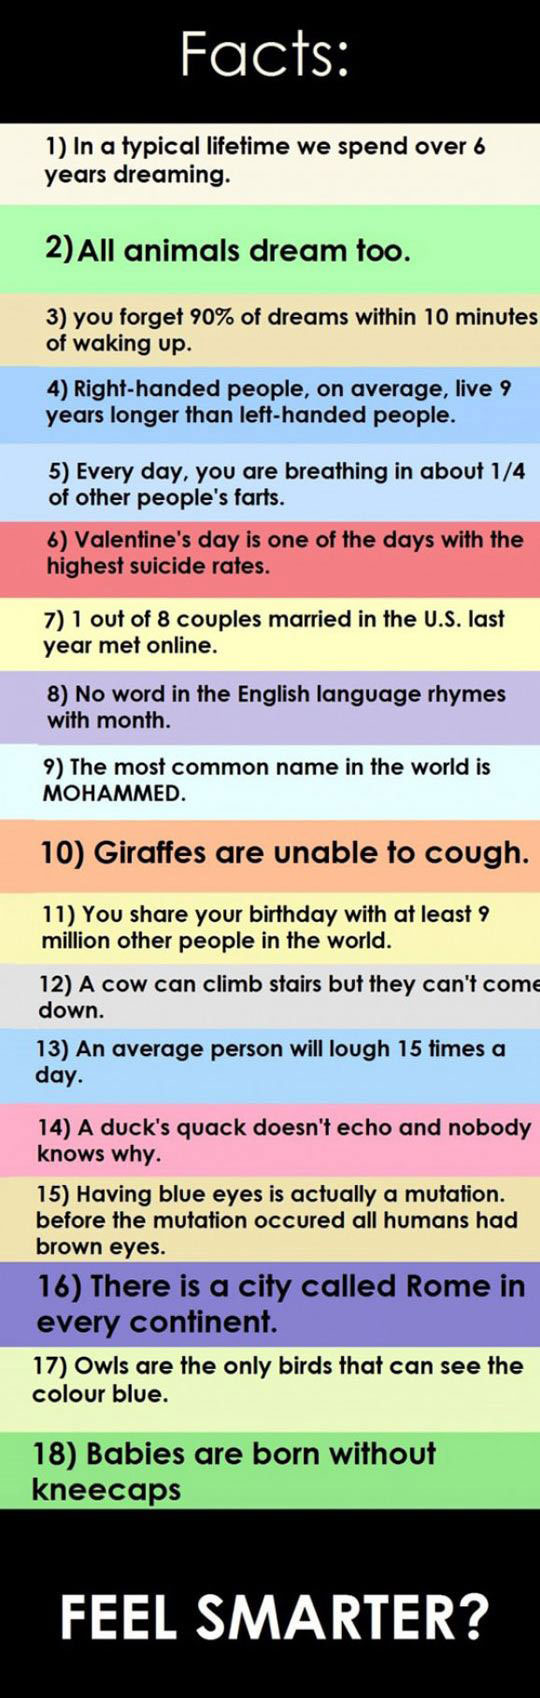 18 facts about life and stuff, feel smarter?